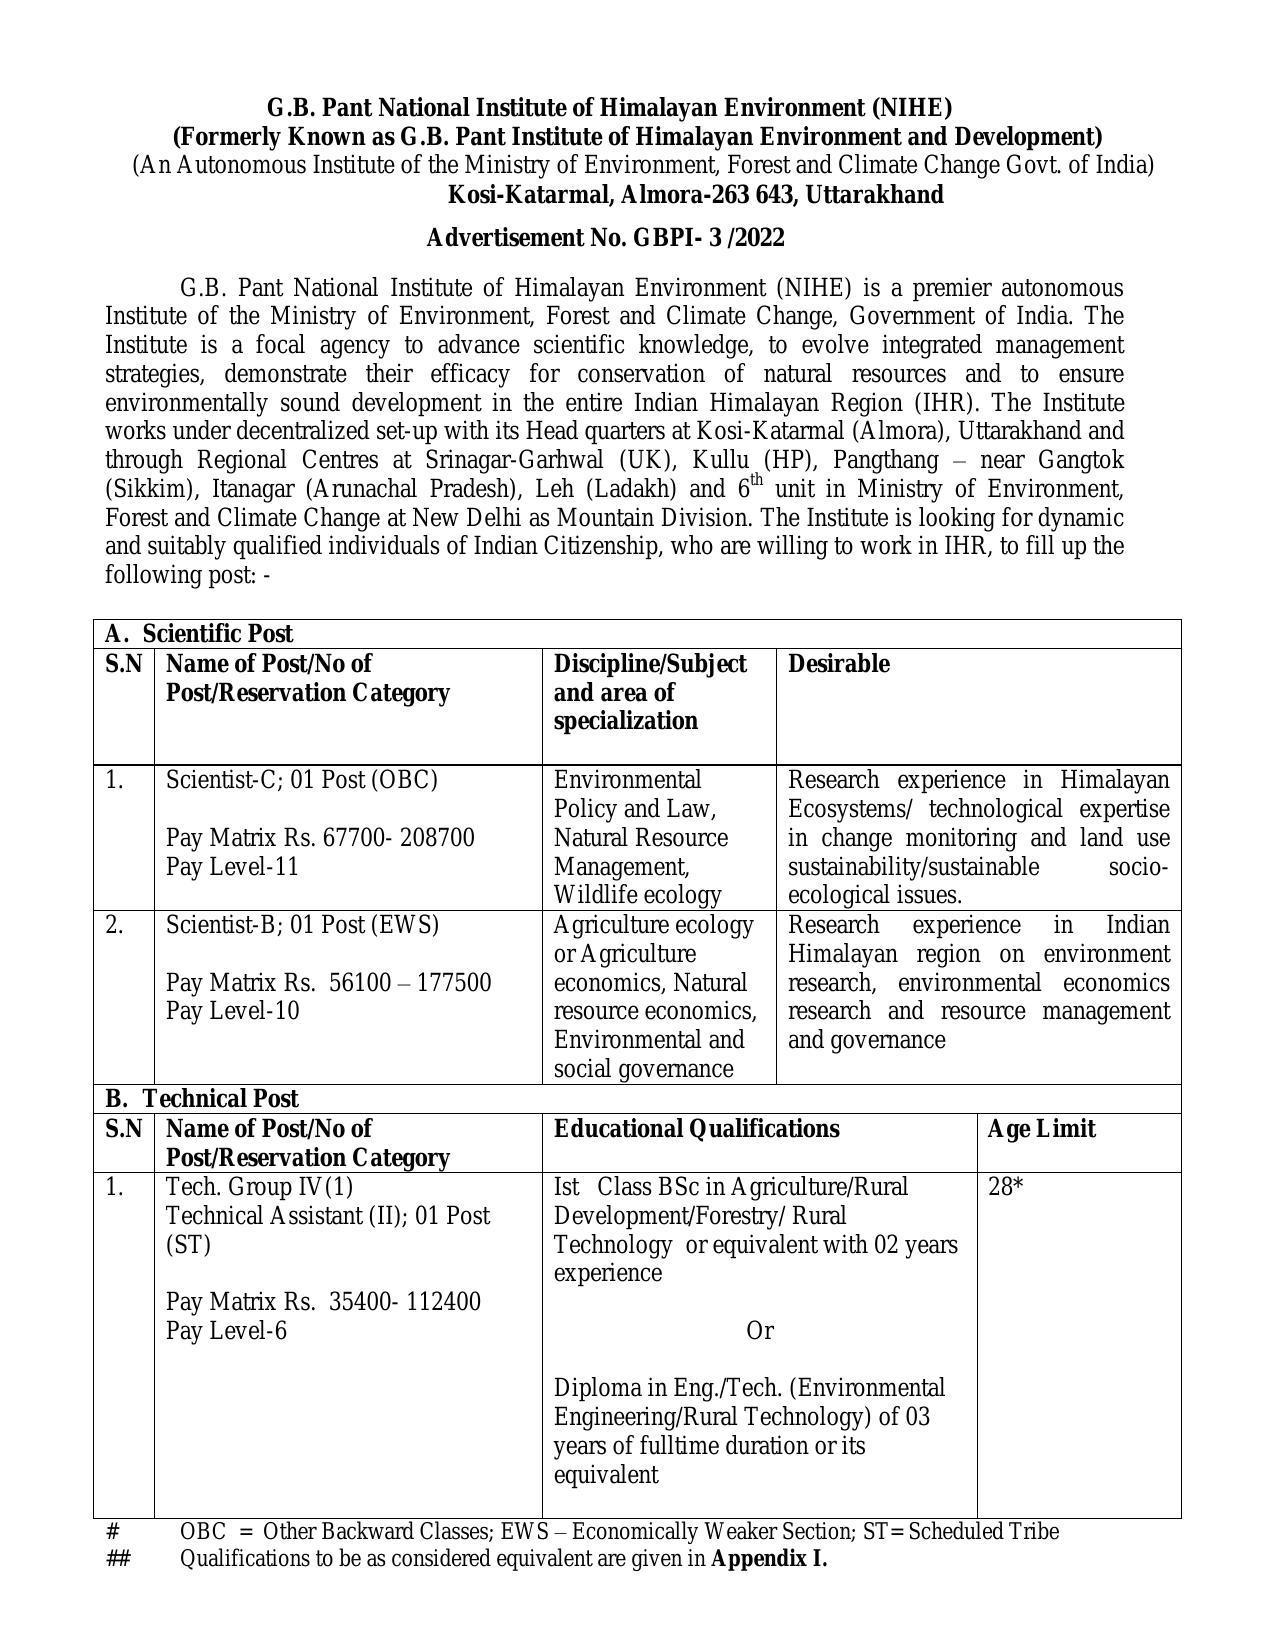 GBPNIHESD Invites Application for Scientist-C, Scientist-B, More Vacancies Recruitment 2022 - Page 1